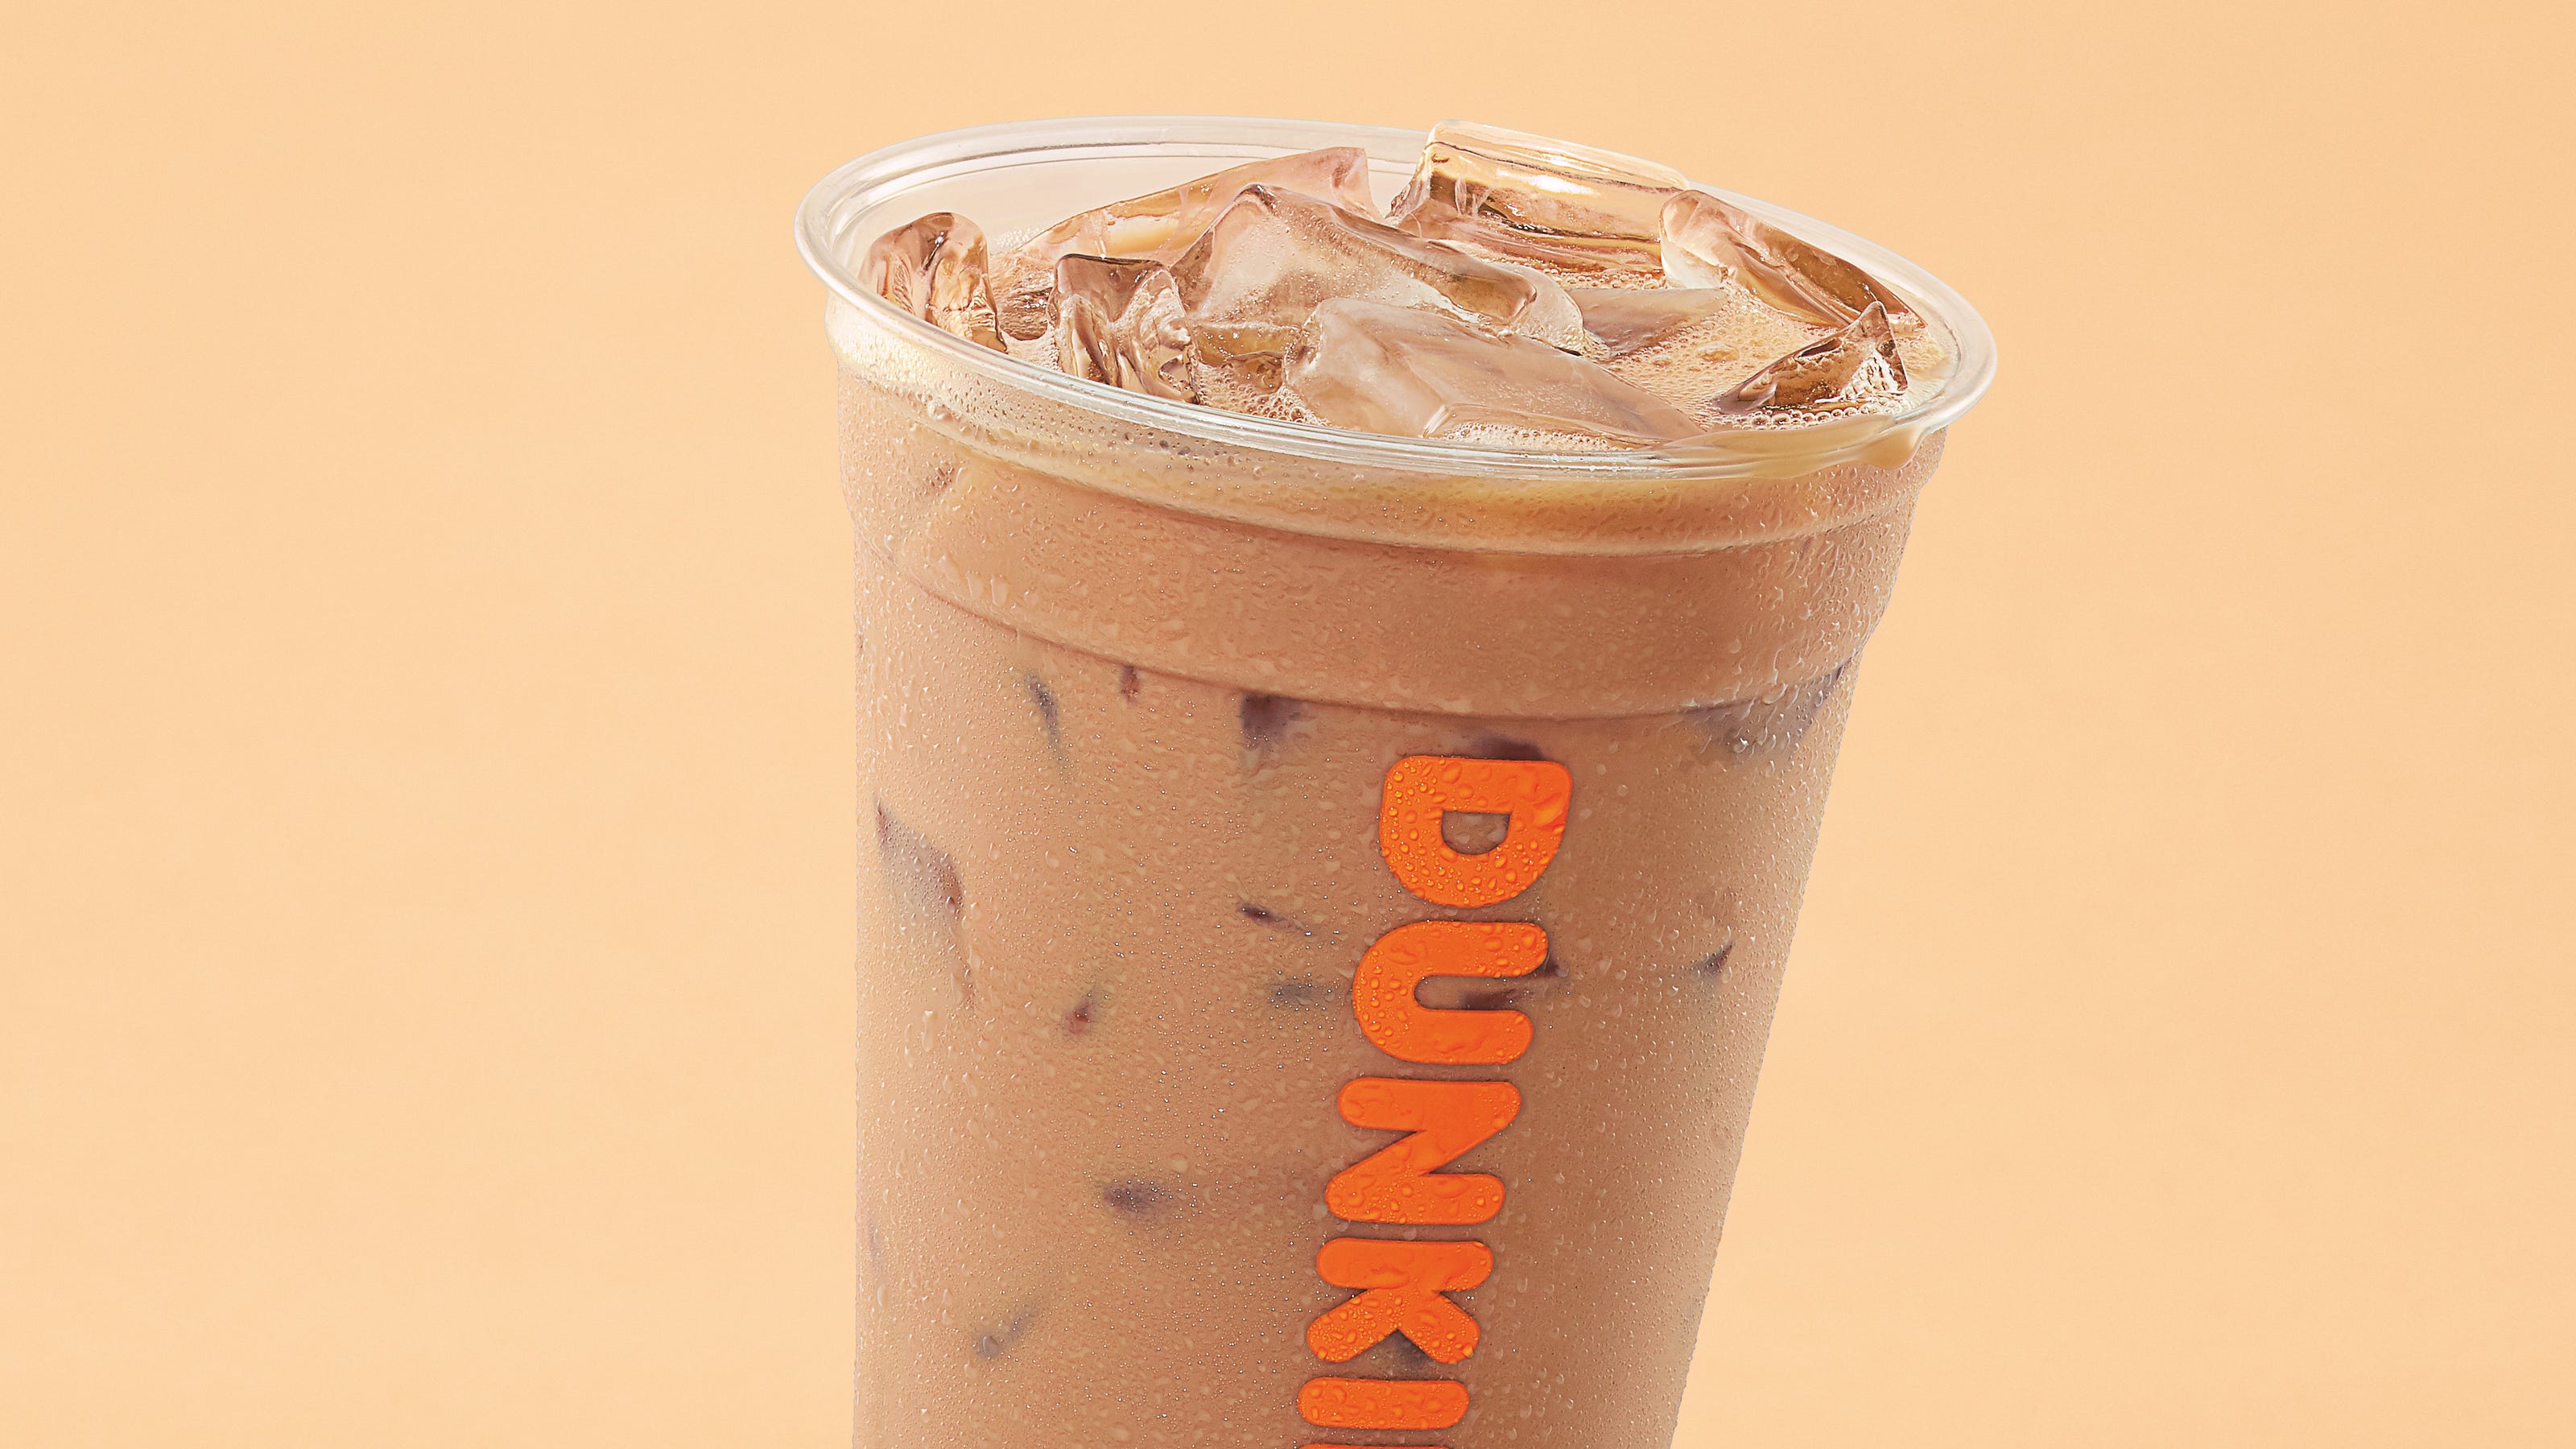 Dunkin' Donuts offers free small iced coffee on Sept. 9